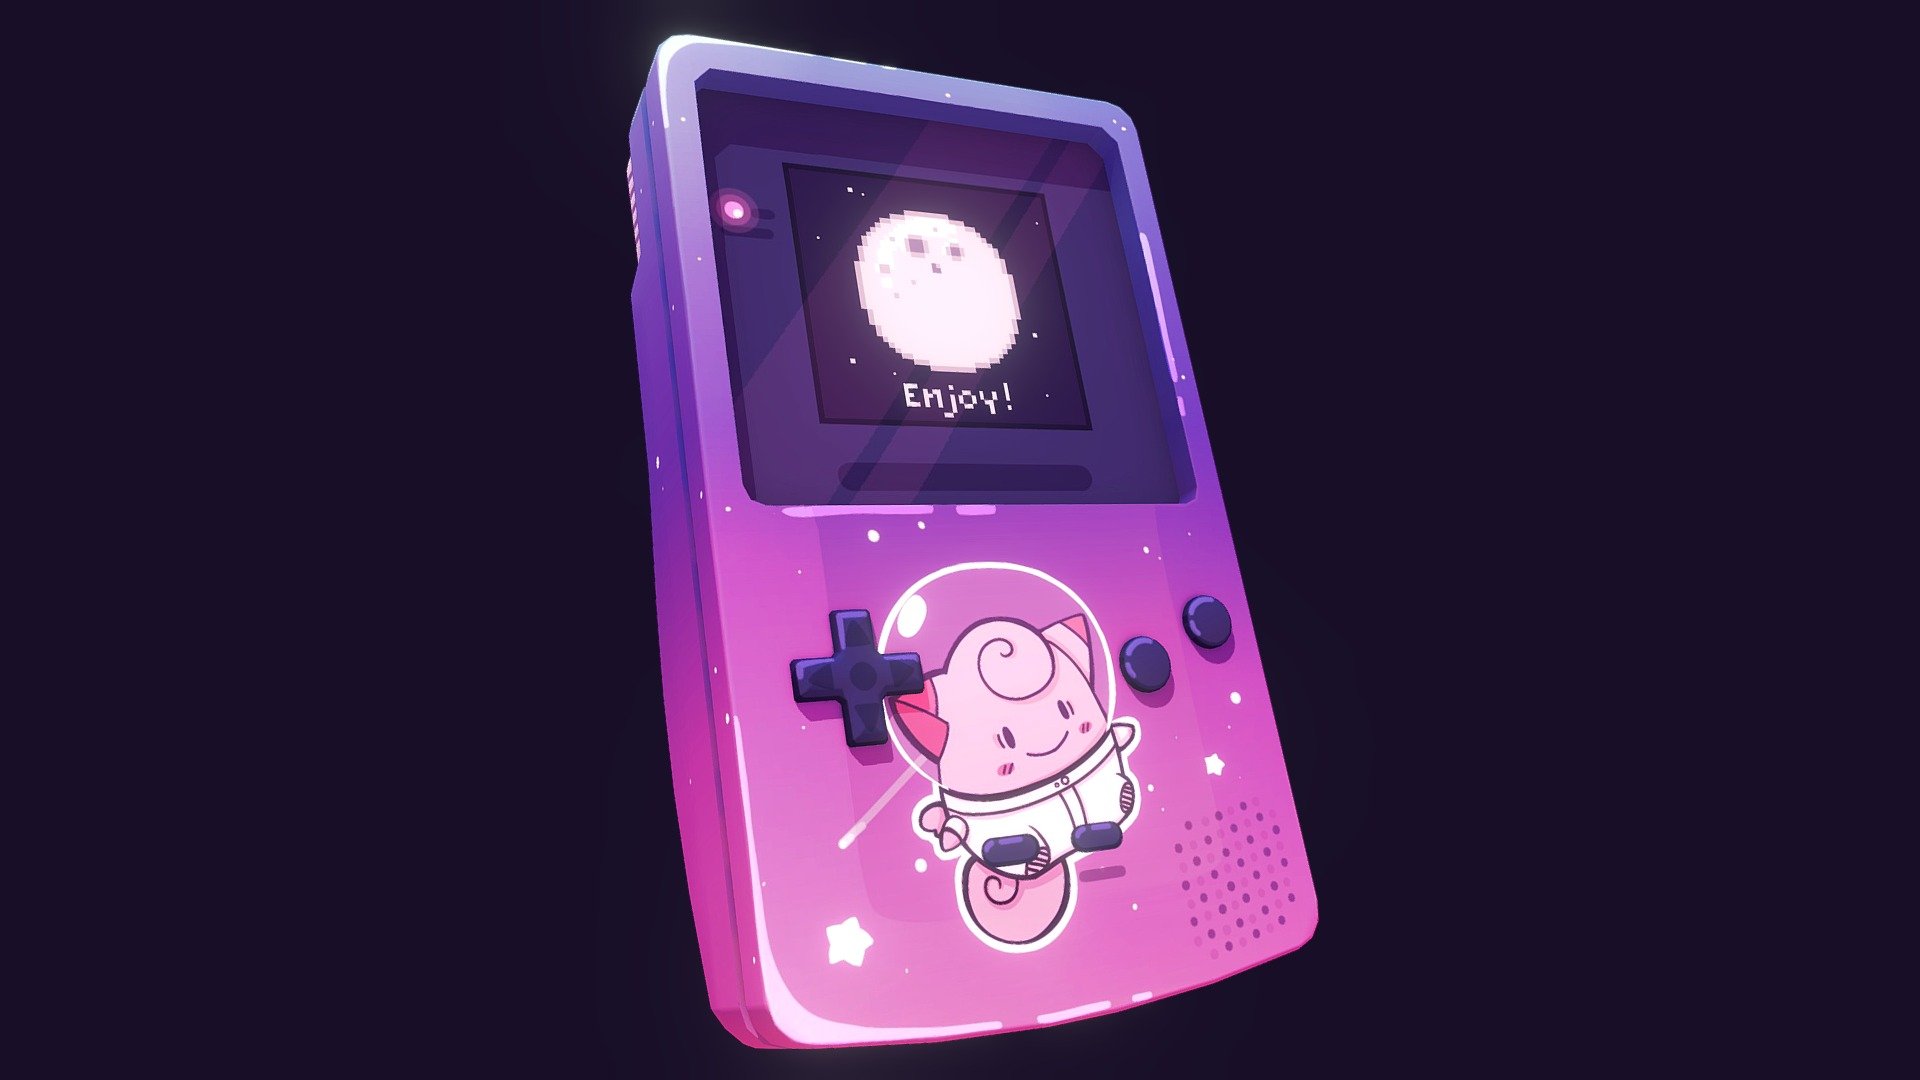 Had to get the idea of Clefairy leaving the moon to bring us this piece of joy to earth out of my head xD So here is another entry for the handpainted gameboy challenge :)

Credits:  rommalart (original model) and Curlscurly (retopology)

Based on &ldquo;Handpainting Challenge - Gameboy